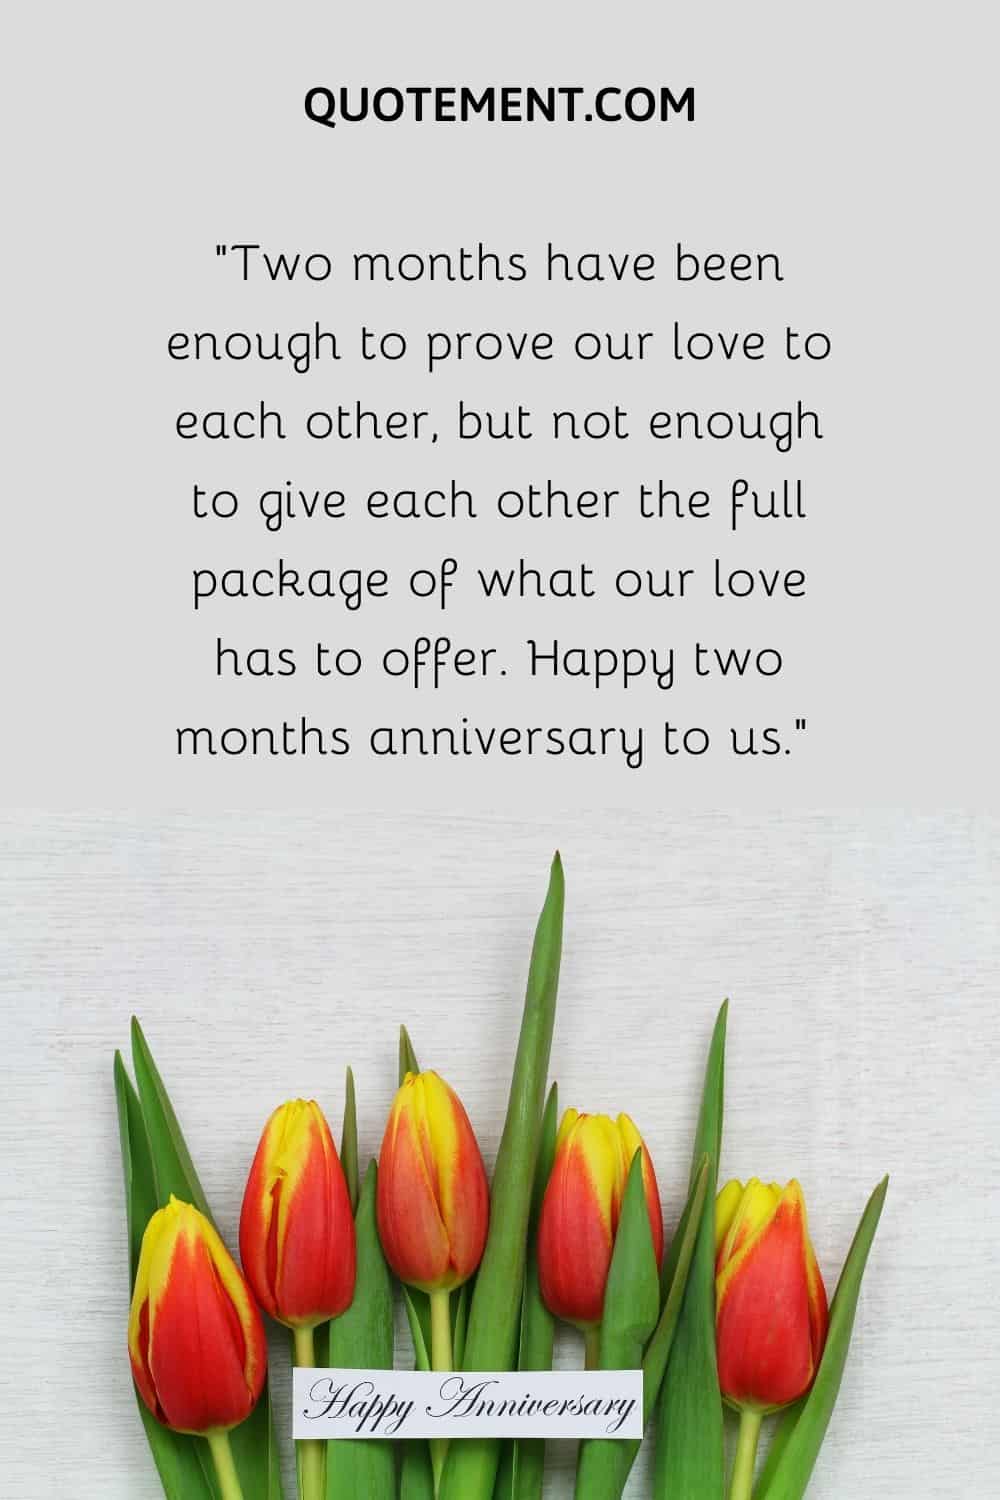 “Two months have been enough to prove our love to each other, but not enough to give each other the full package of what our love has to offer. Happy two months anniversary to us.”